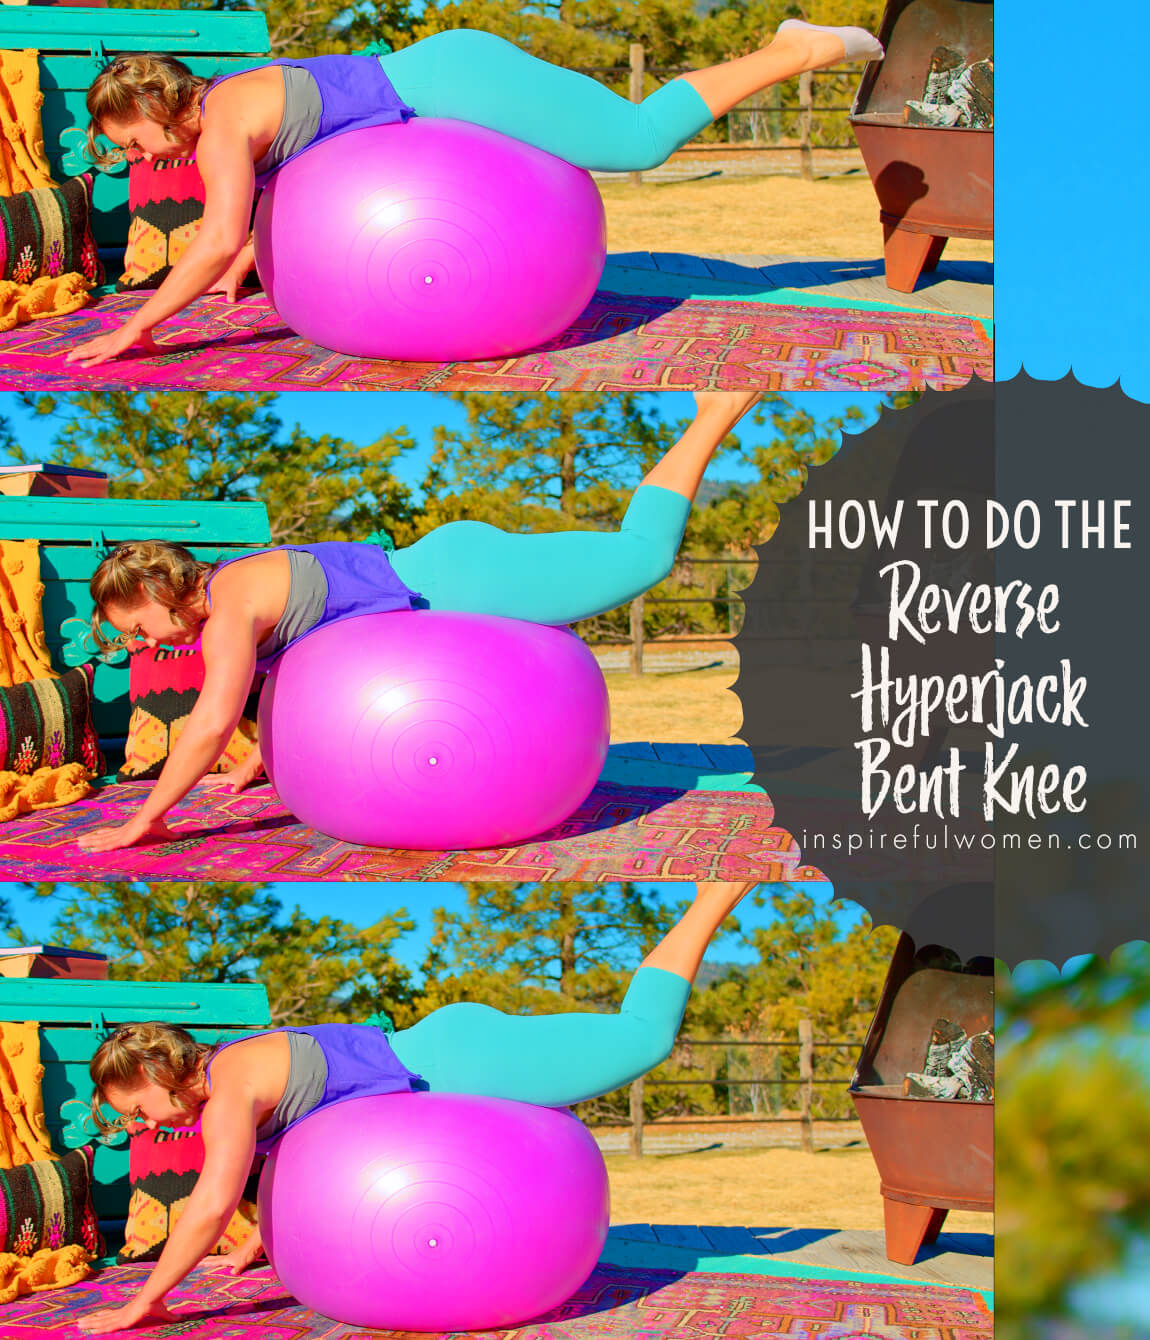 how-to-ball-reverse-hyper-jack-bent-knee-gluteus-maximus-exercise-proper-form